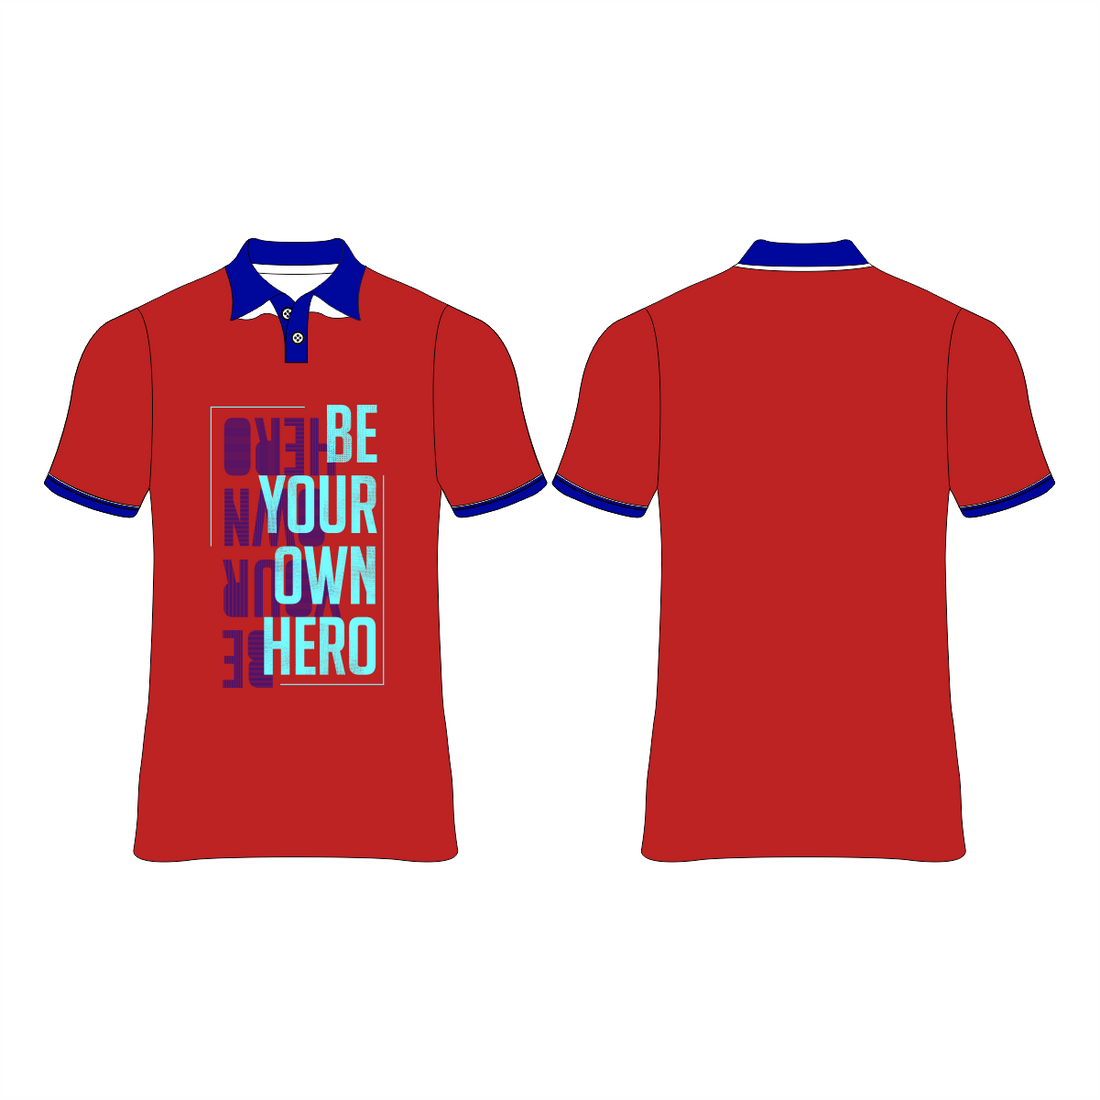 BE YOUR OWN HERO PRINTED T-SHIRT